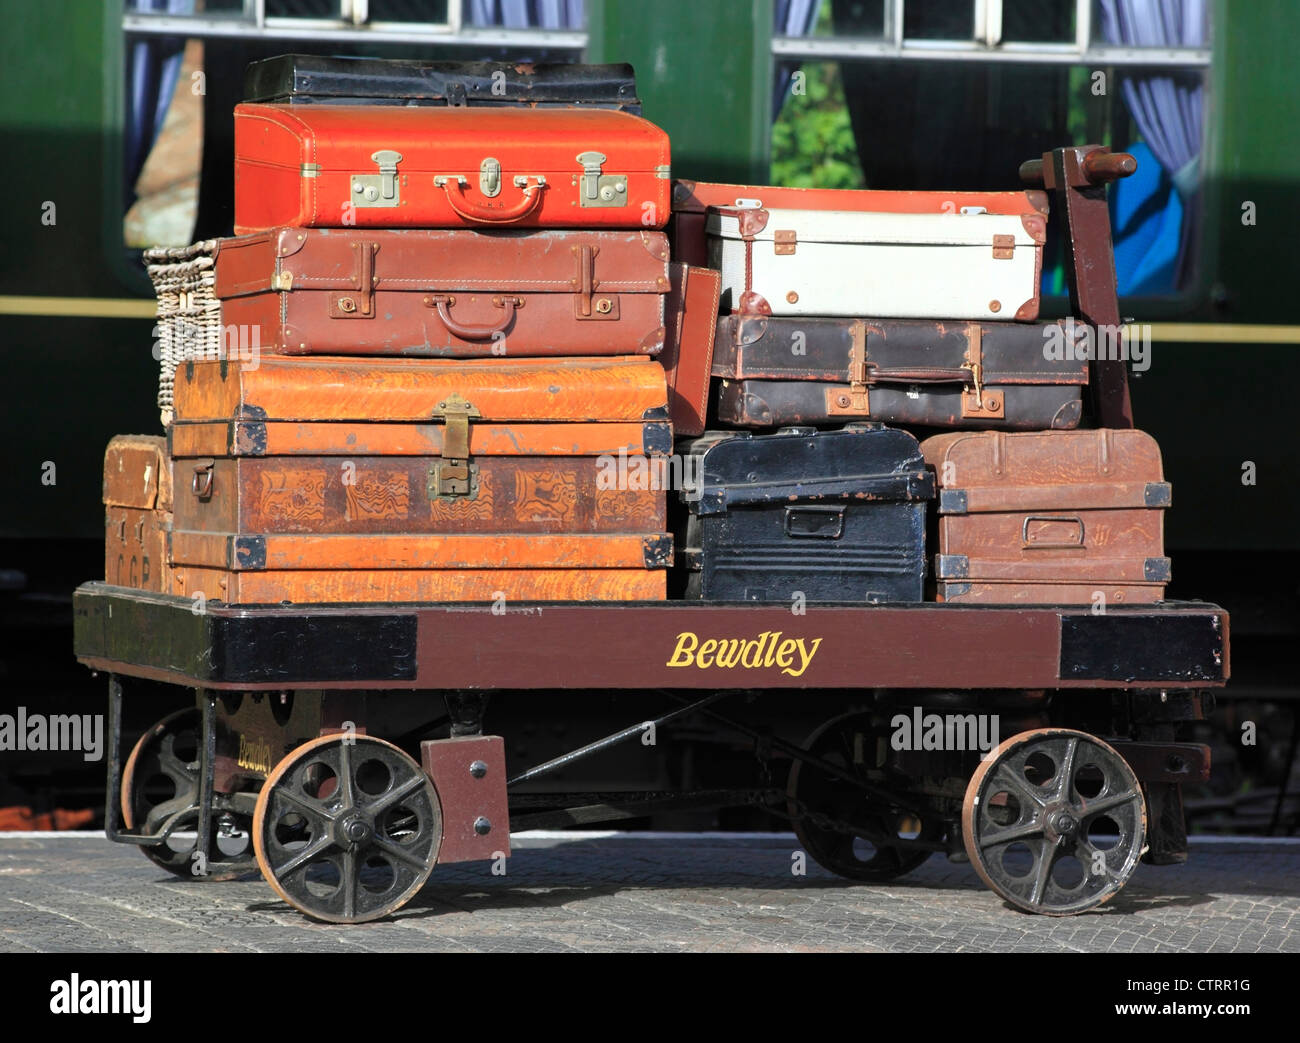 Old fashioned style luggage cart at Bewdley's Severn Valley Railway Station, Worcestershire, England, Europe Stock Photo